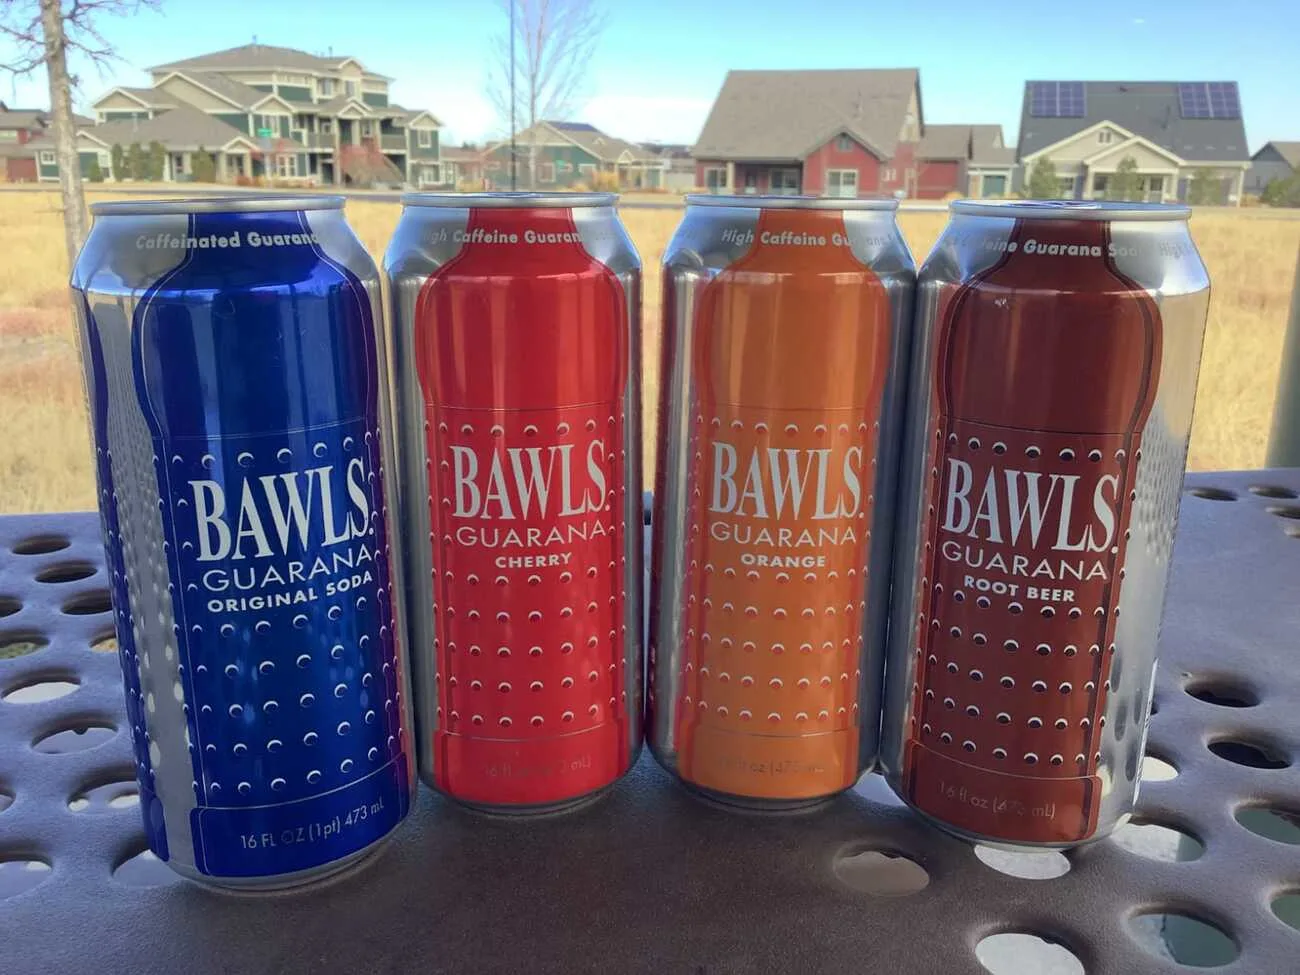 4 different flavors of Bawls energy drink